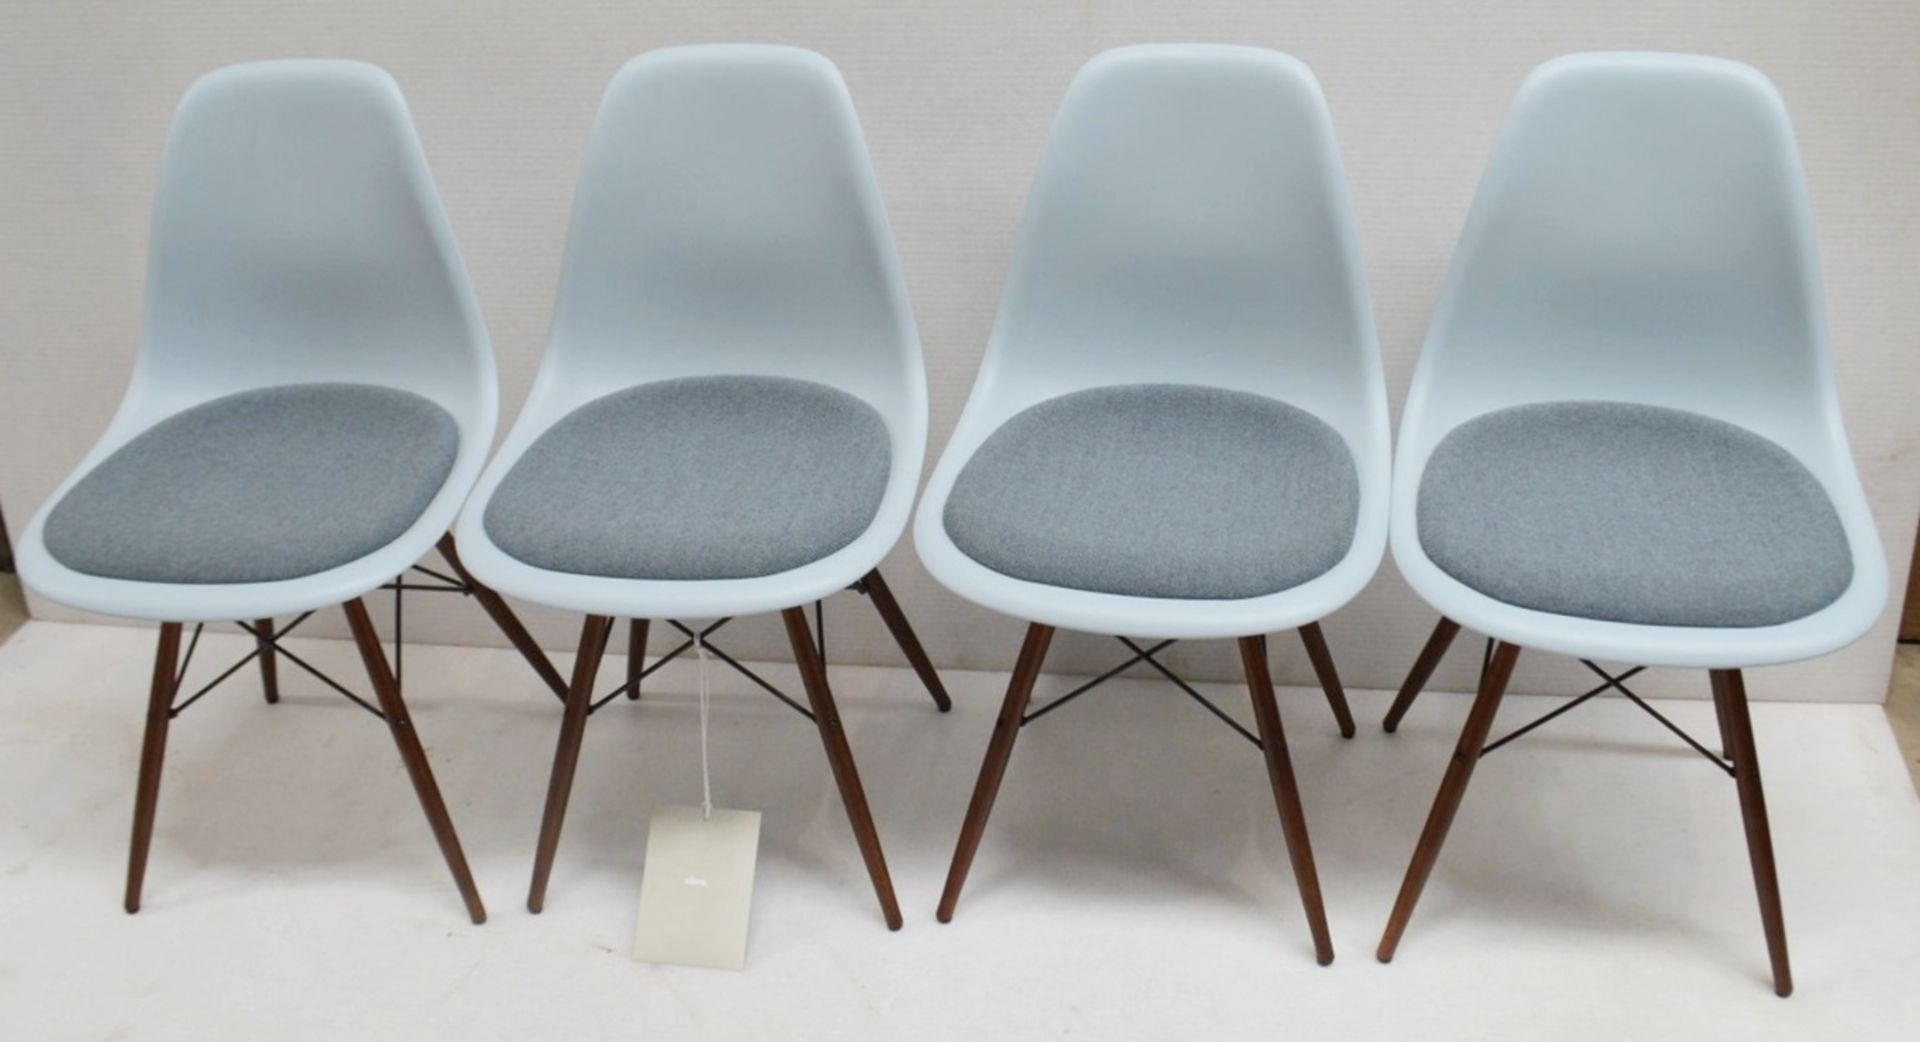 Set Of 4 x VITRA Eames DSW Designer Side Chairs With Upholsted Seats And Maple Bases In A Dark Stain - Image 2 of 11